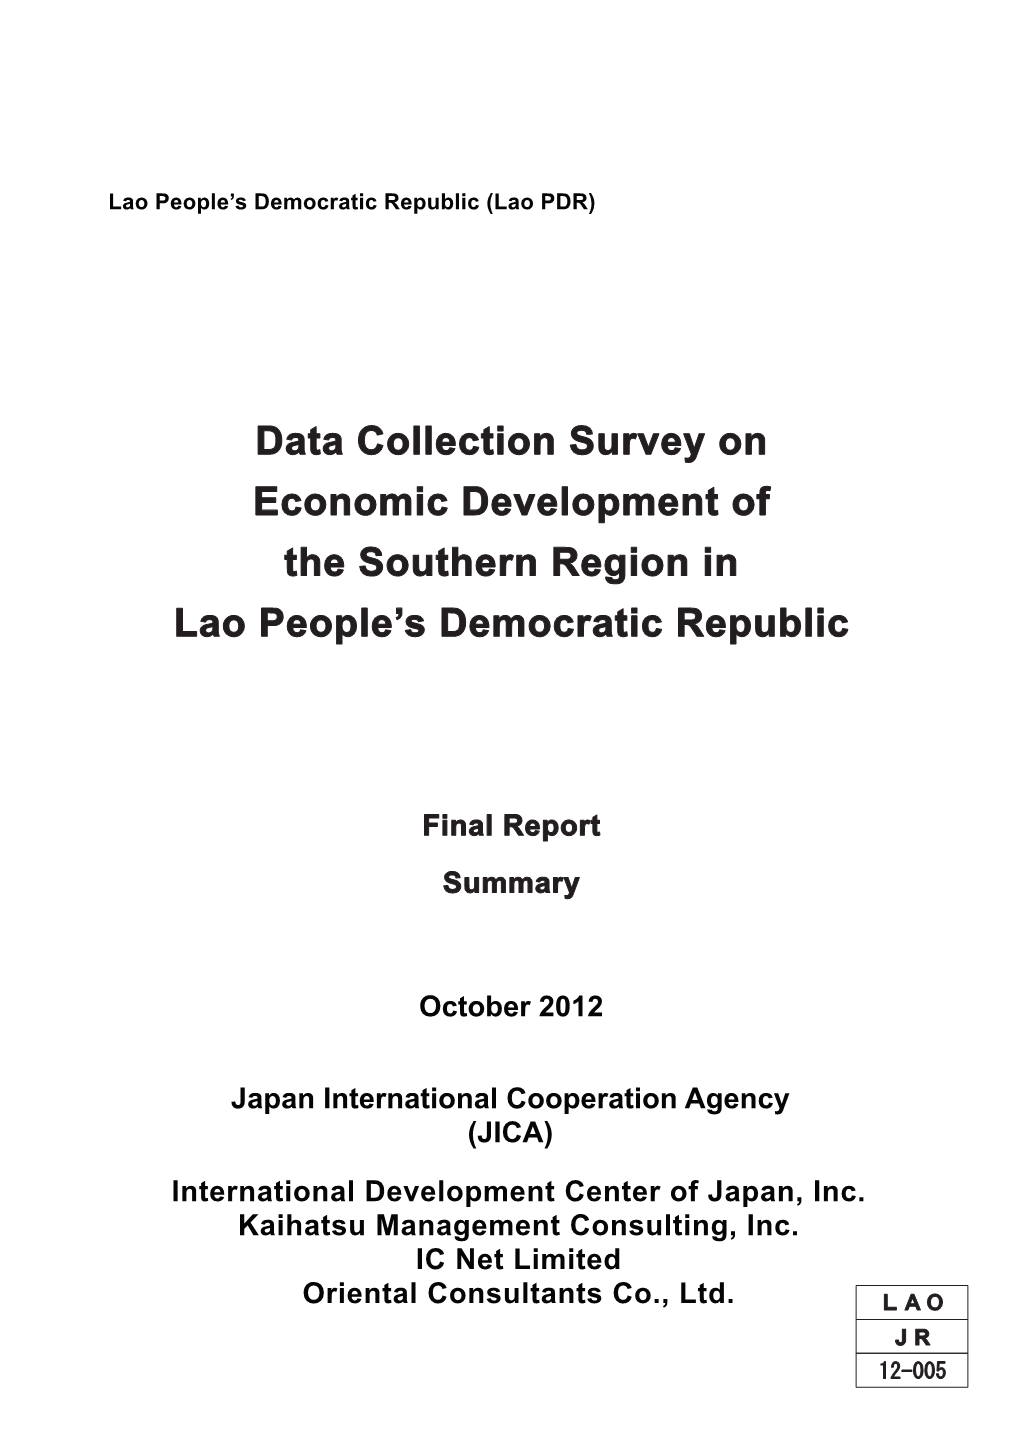 Data Collection Survey on Economic Development of the Southern Region in Lao People’S Democratic Republic